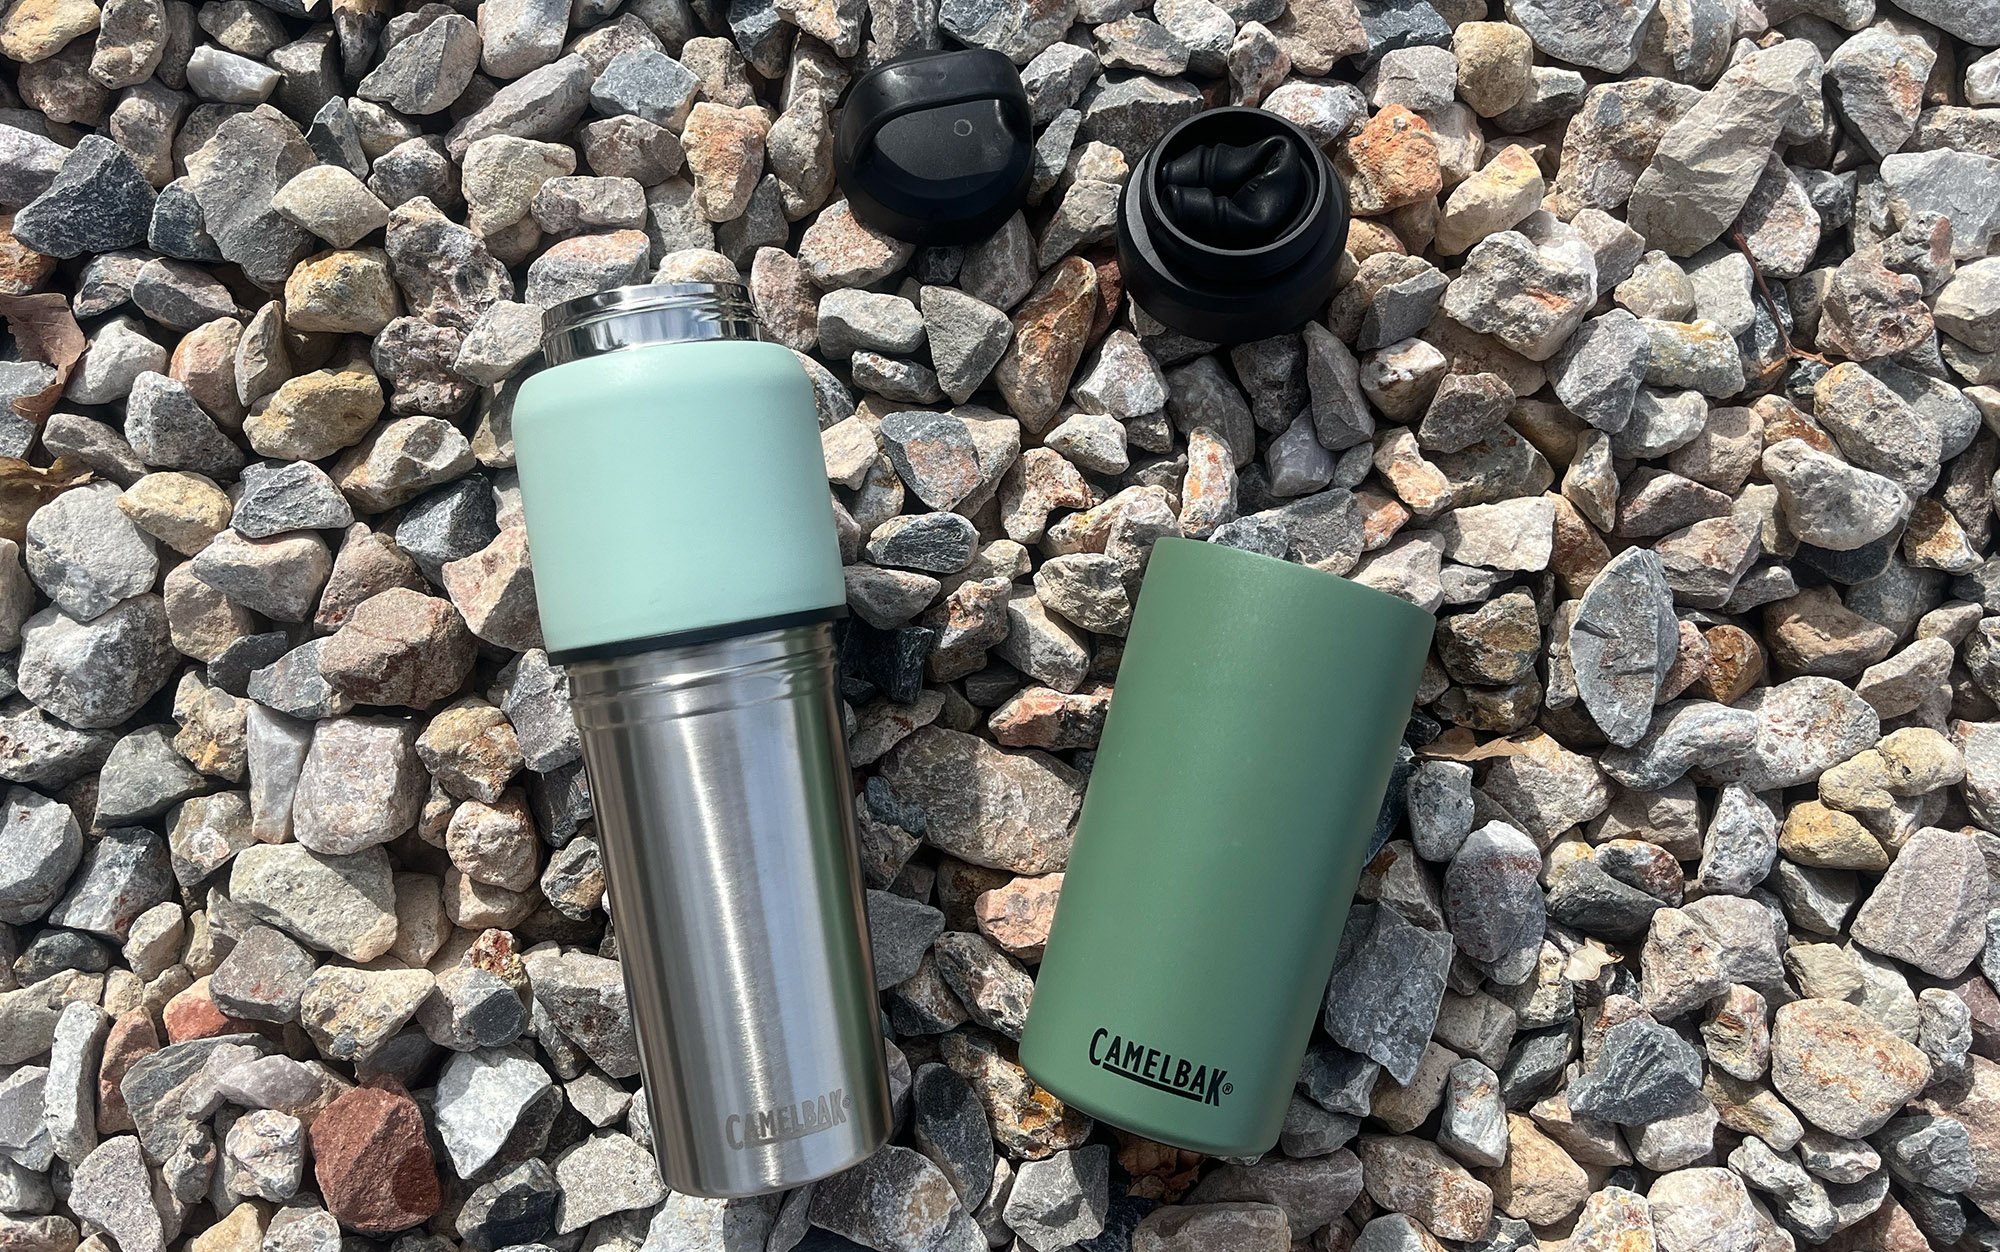 The CamelBak Multibev tumbler unscrews from the bottom and the lid is stored in the cap.